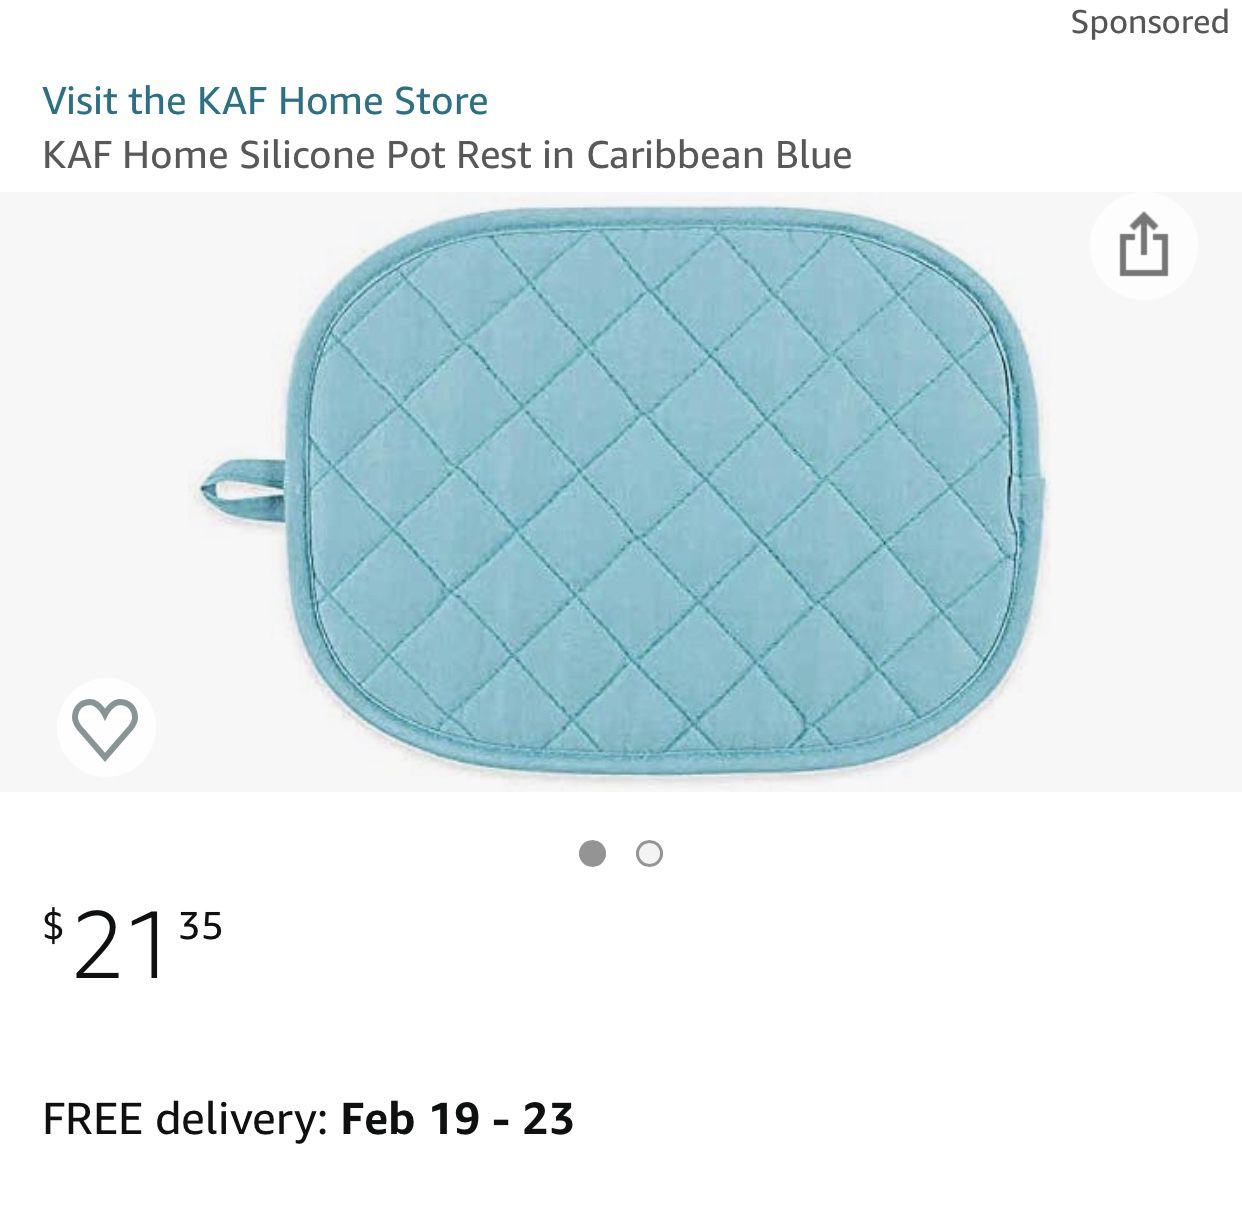 KAF Home Silicone Pot Rest in Caribbean Blue